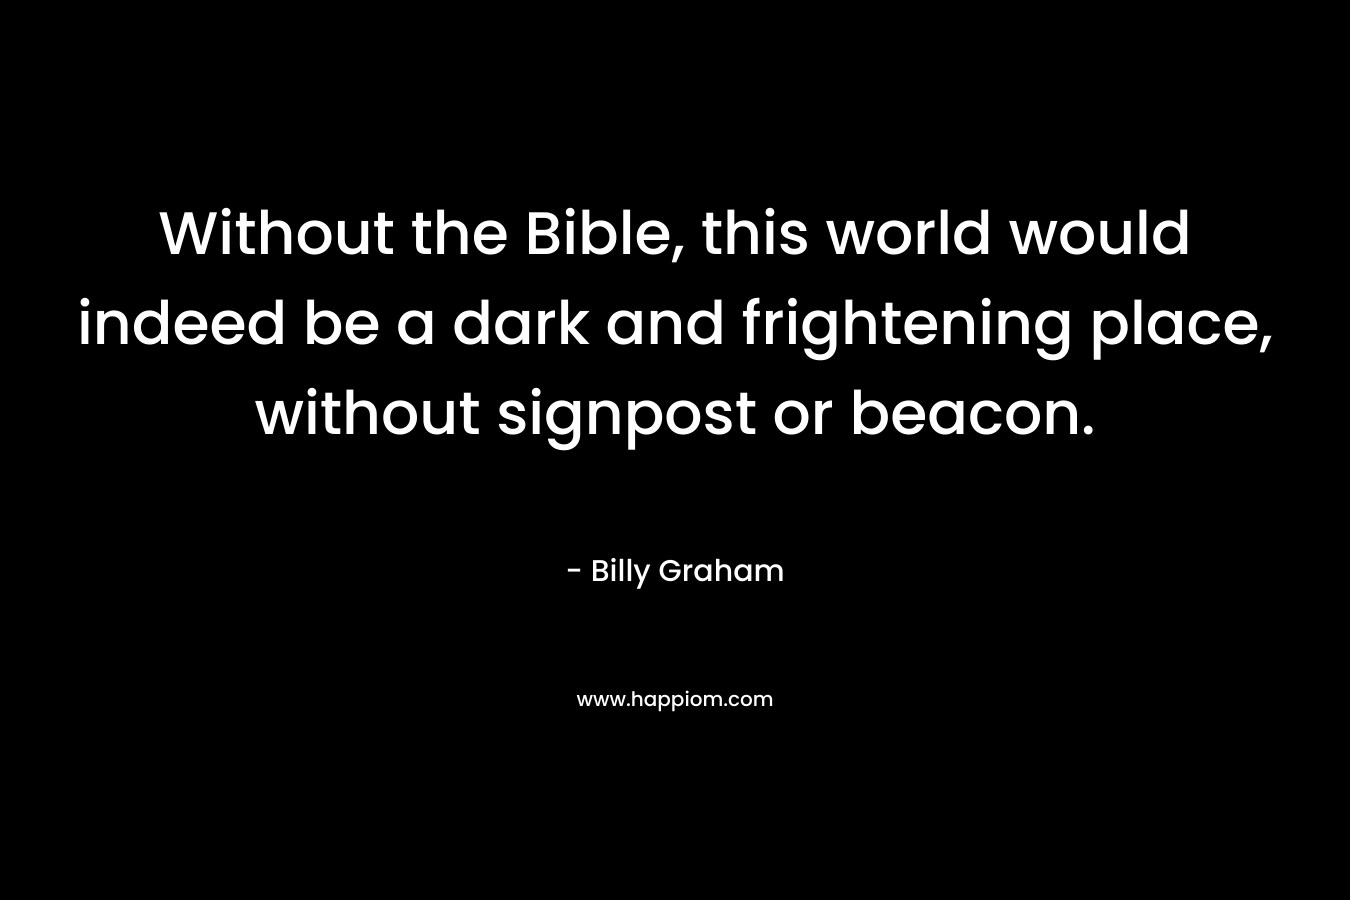 Without the Bible, this world would indeed be a dark and frightening place, without signpost or beacon. – Billy Graham